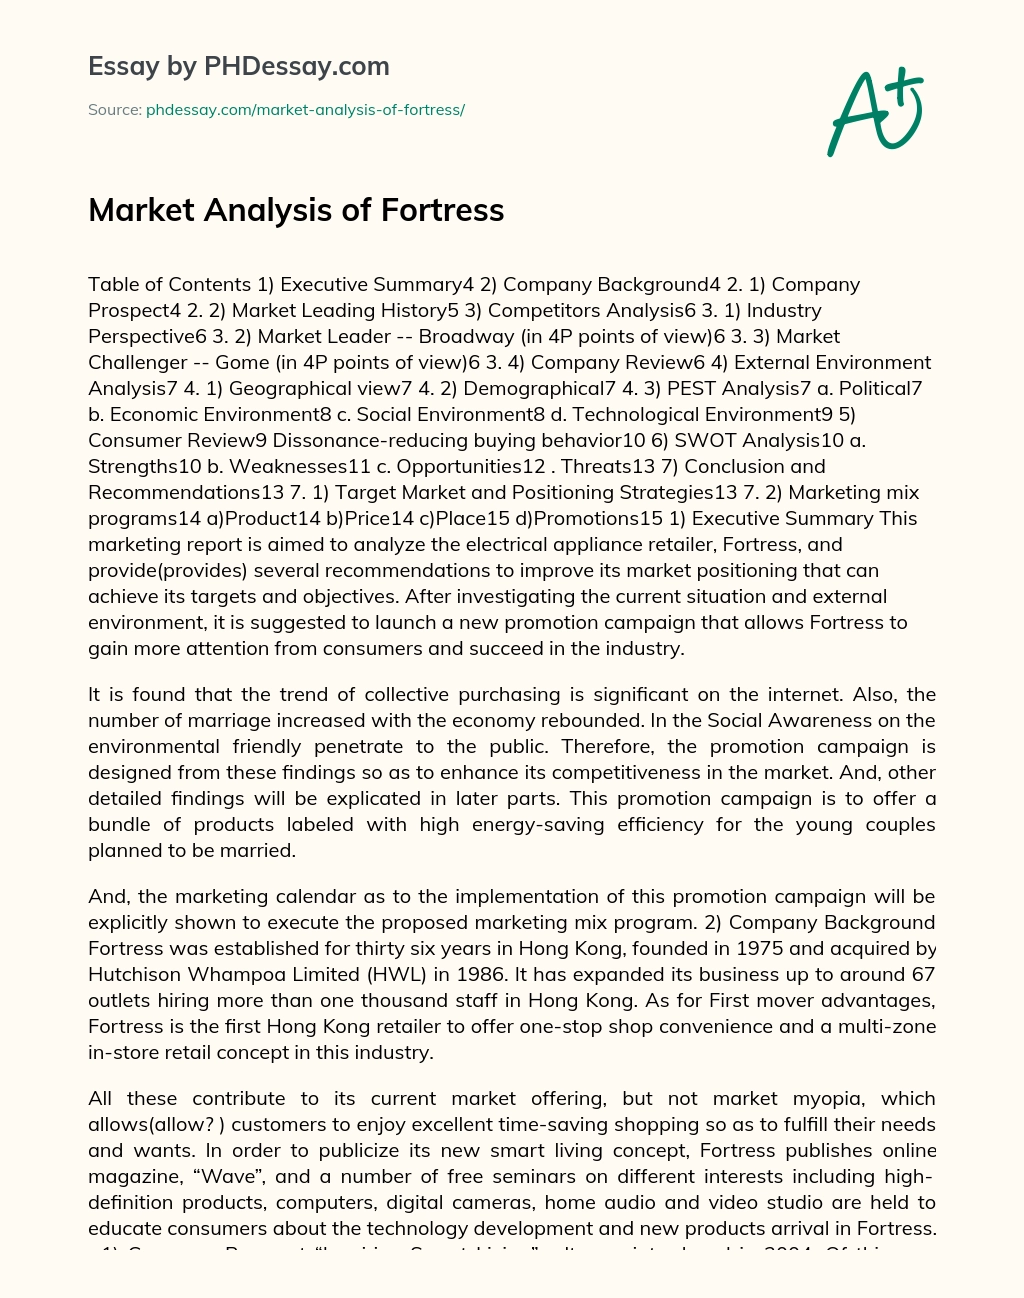 Market Analysis of Fortress essay